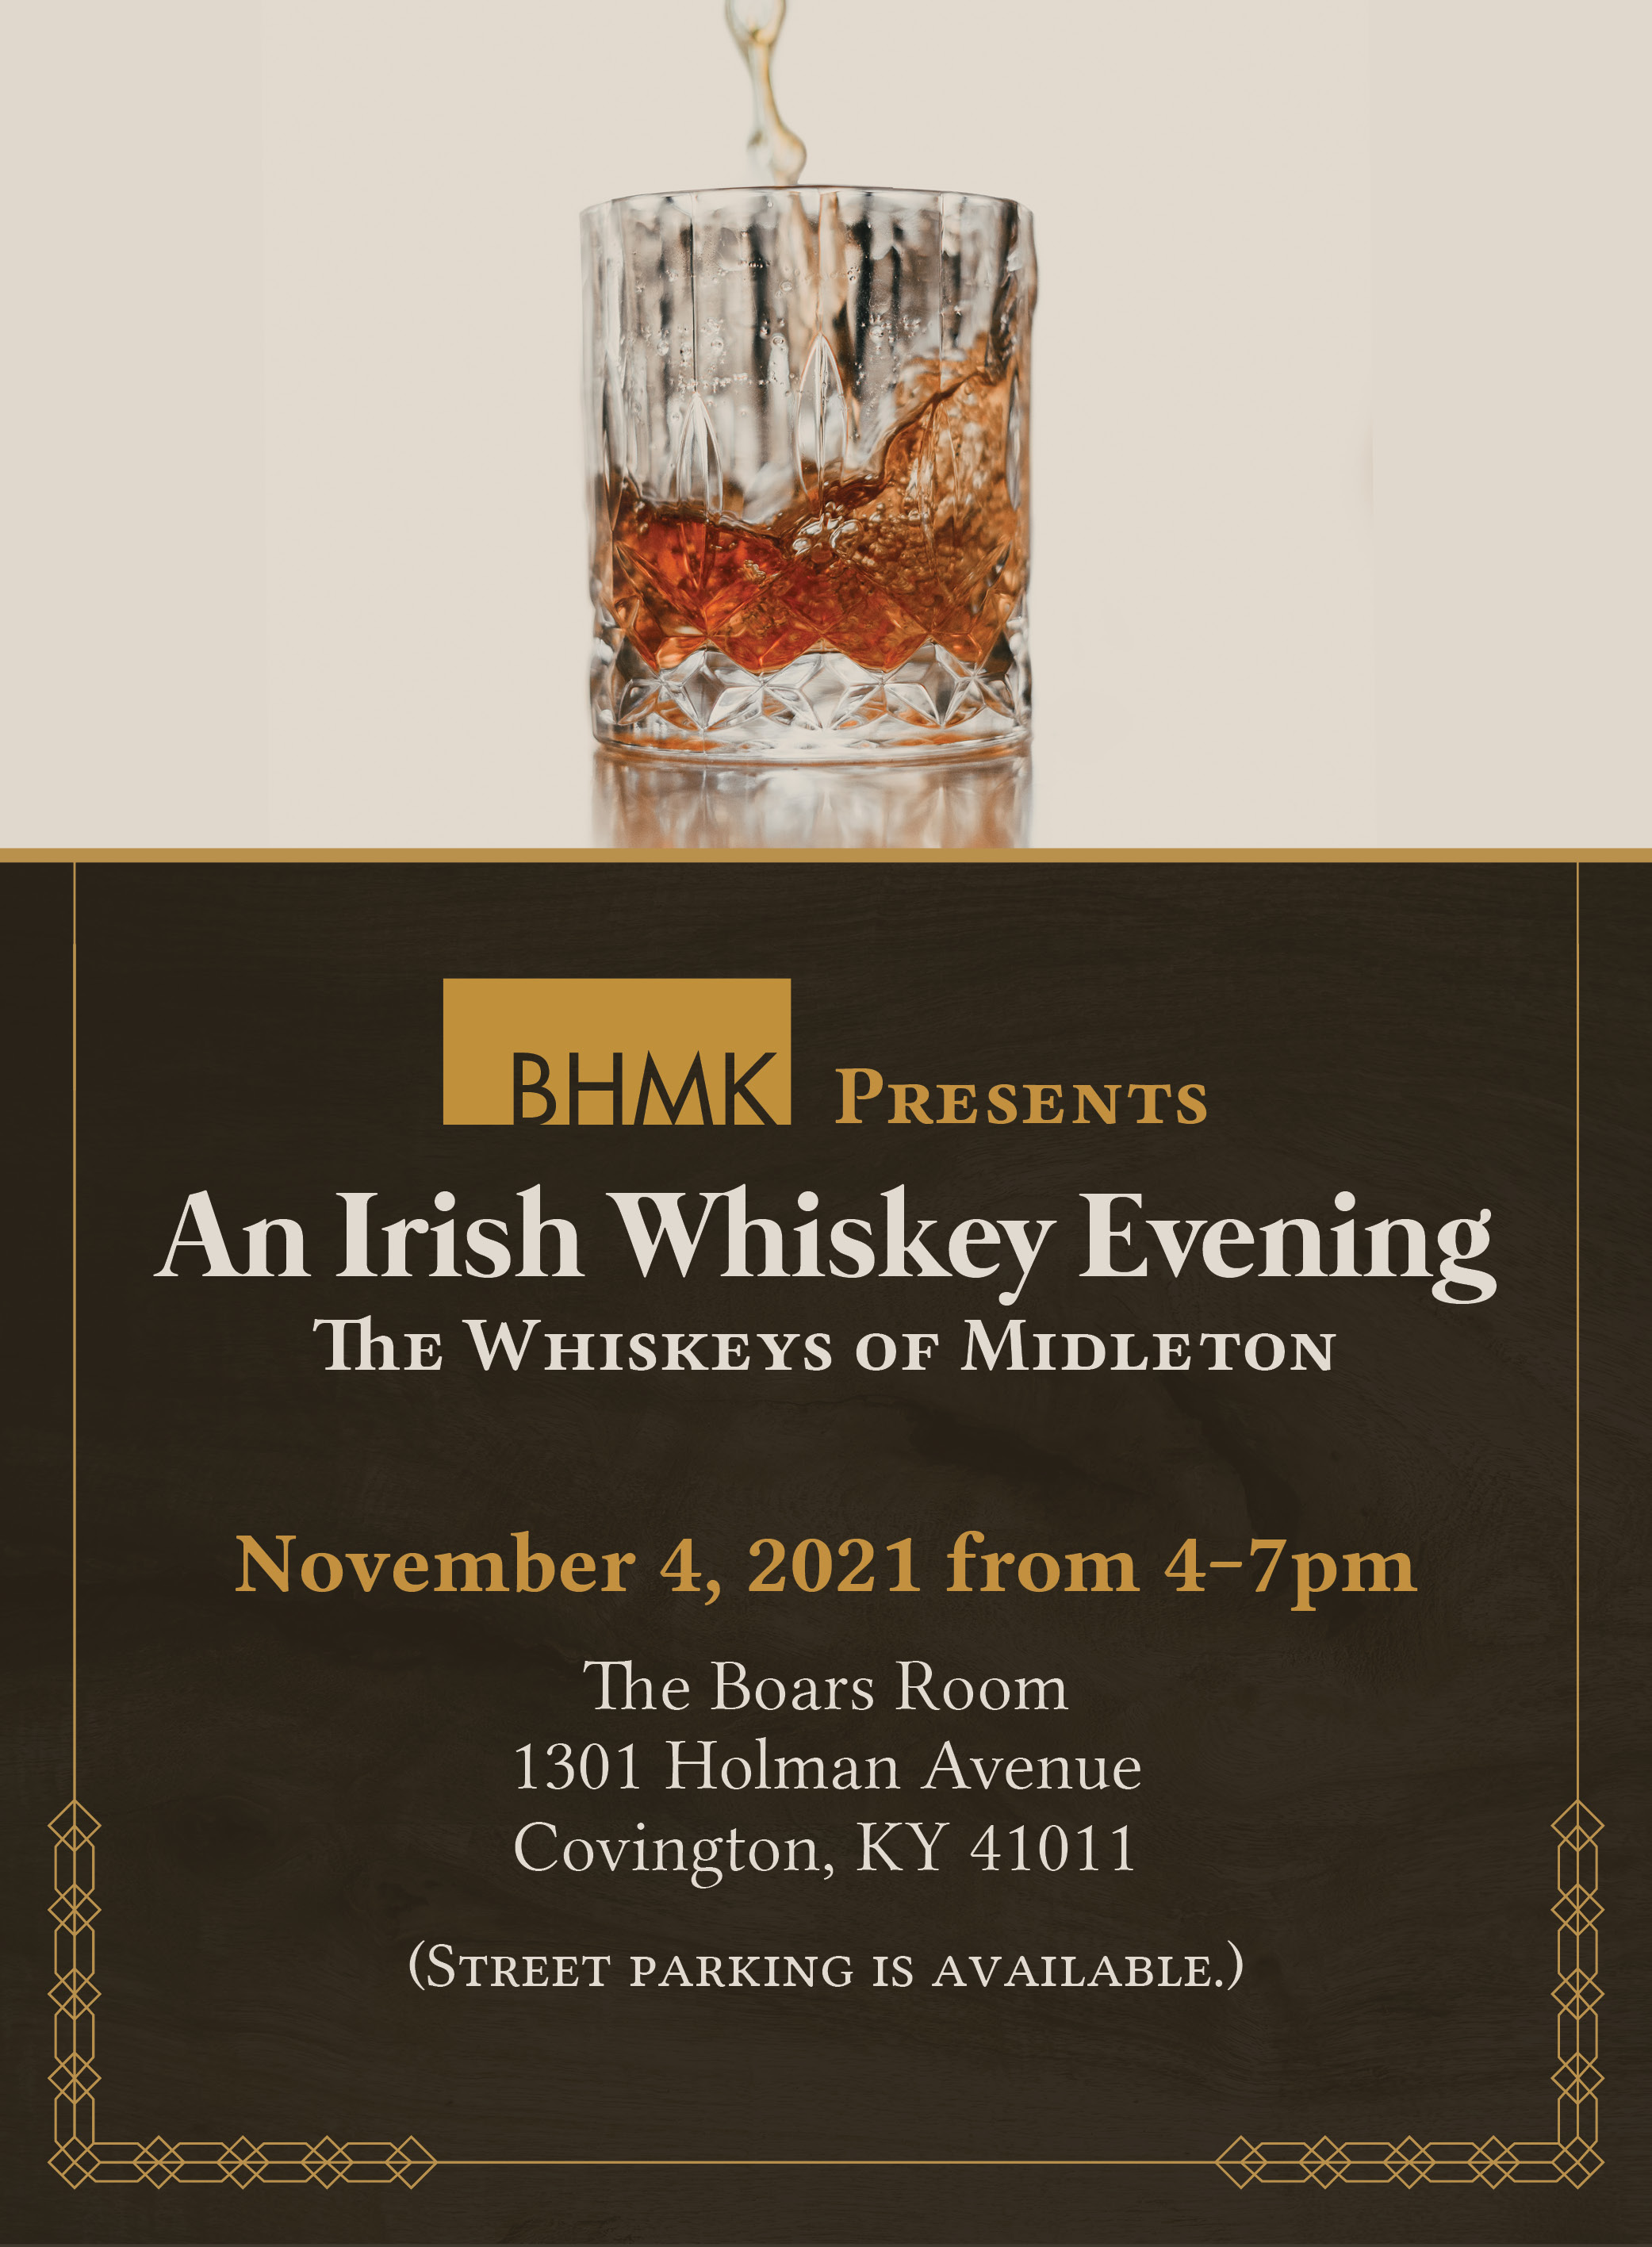 Boars Room Whiskey Tasting Event